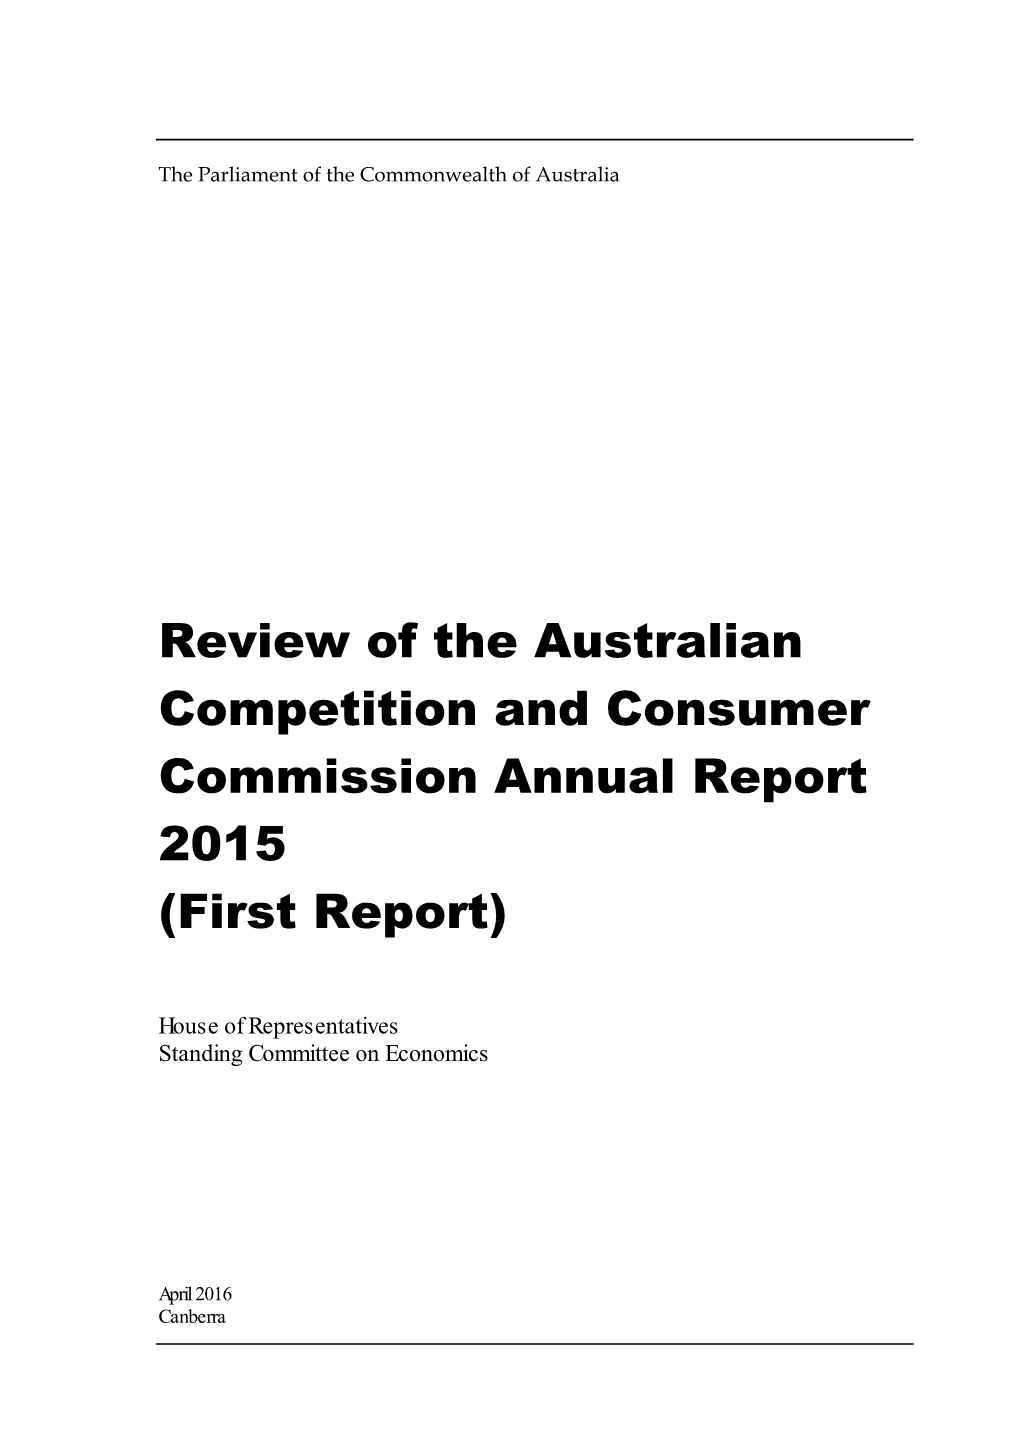 Review of the Australian Competition and Consumer Commission Annual Report 2015 (First Report)